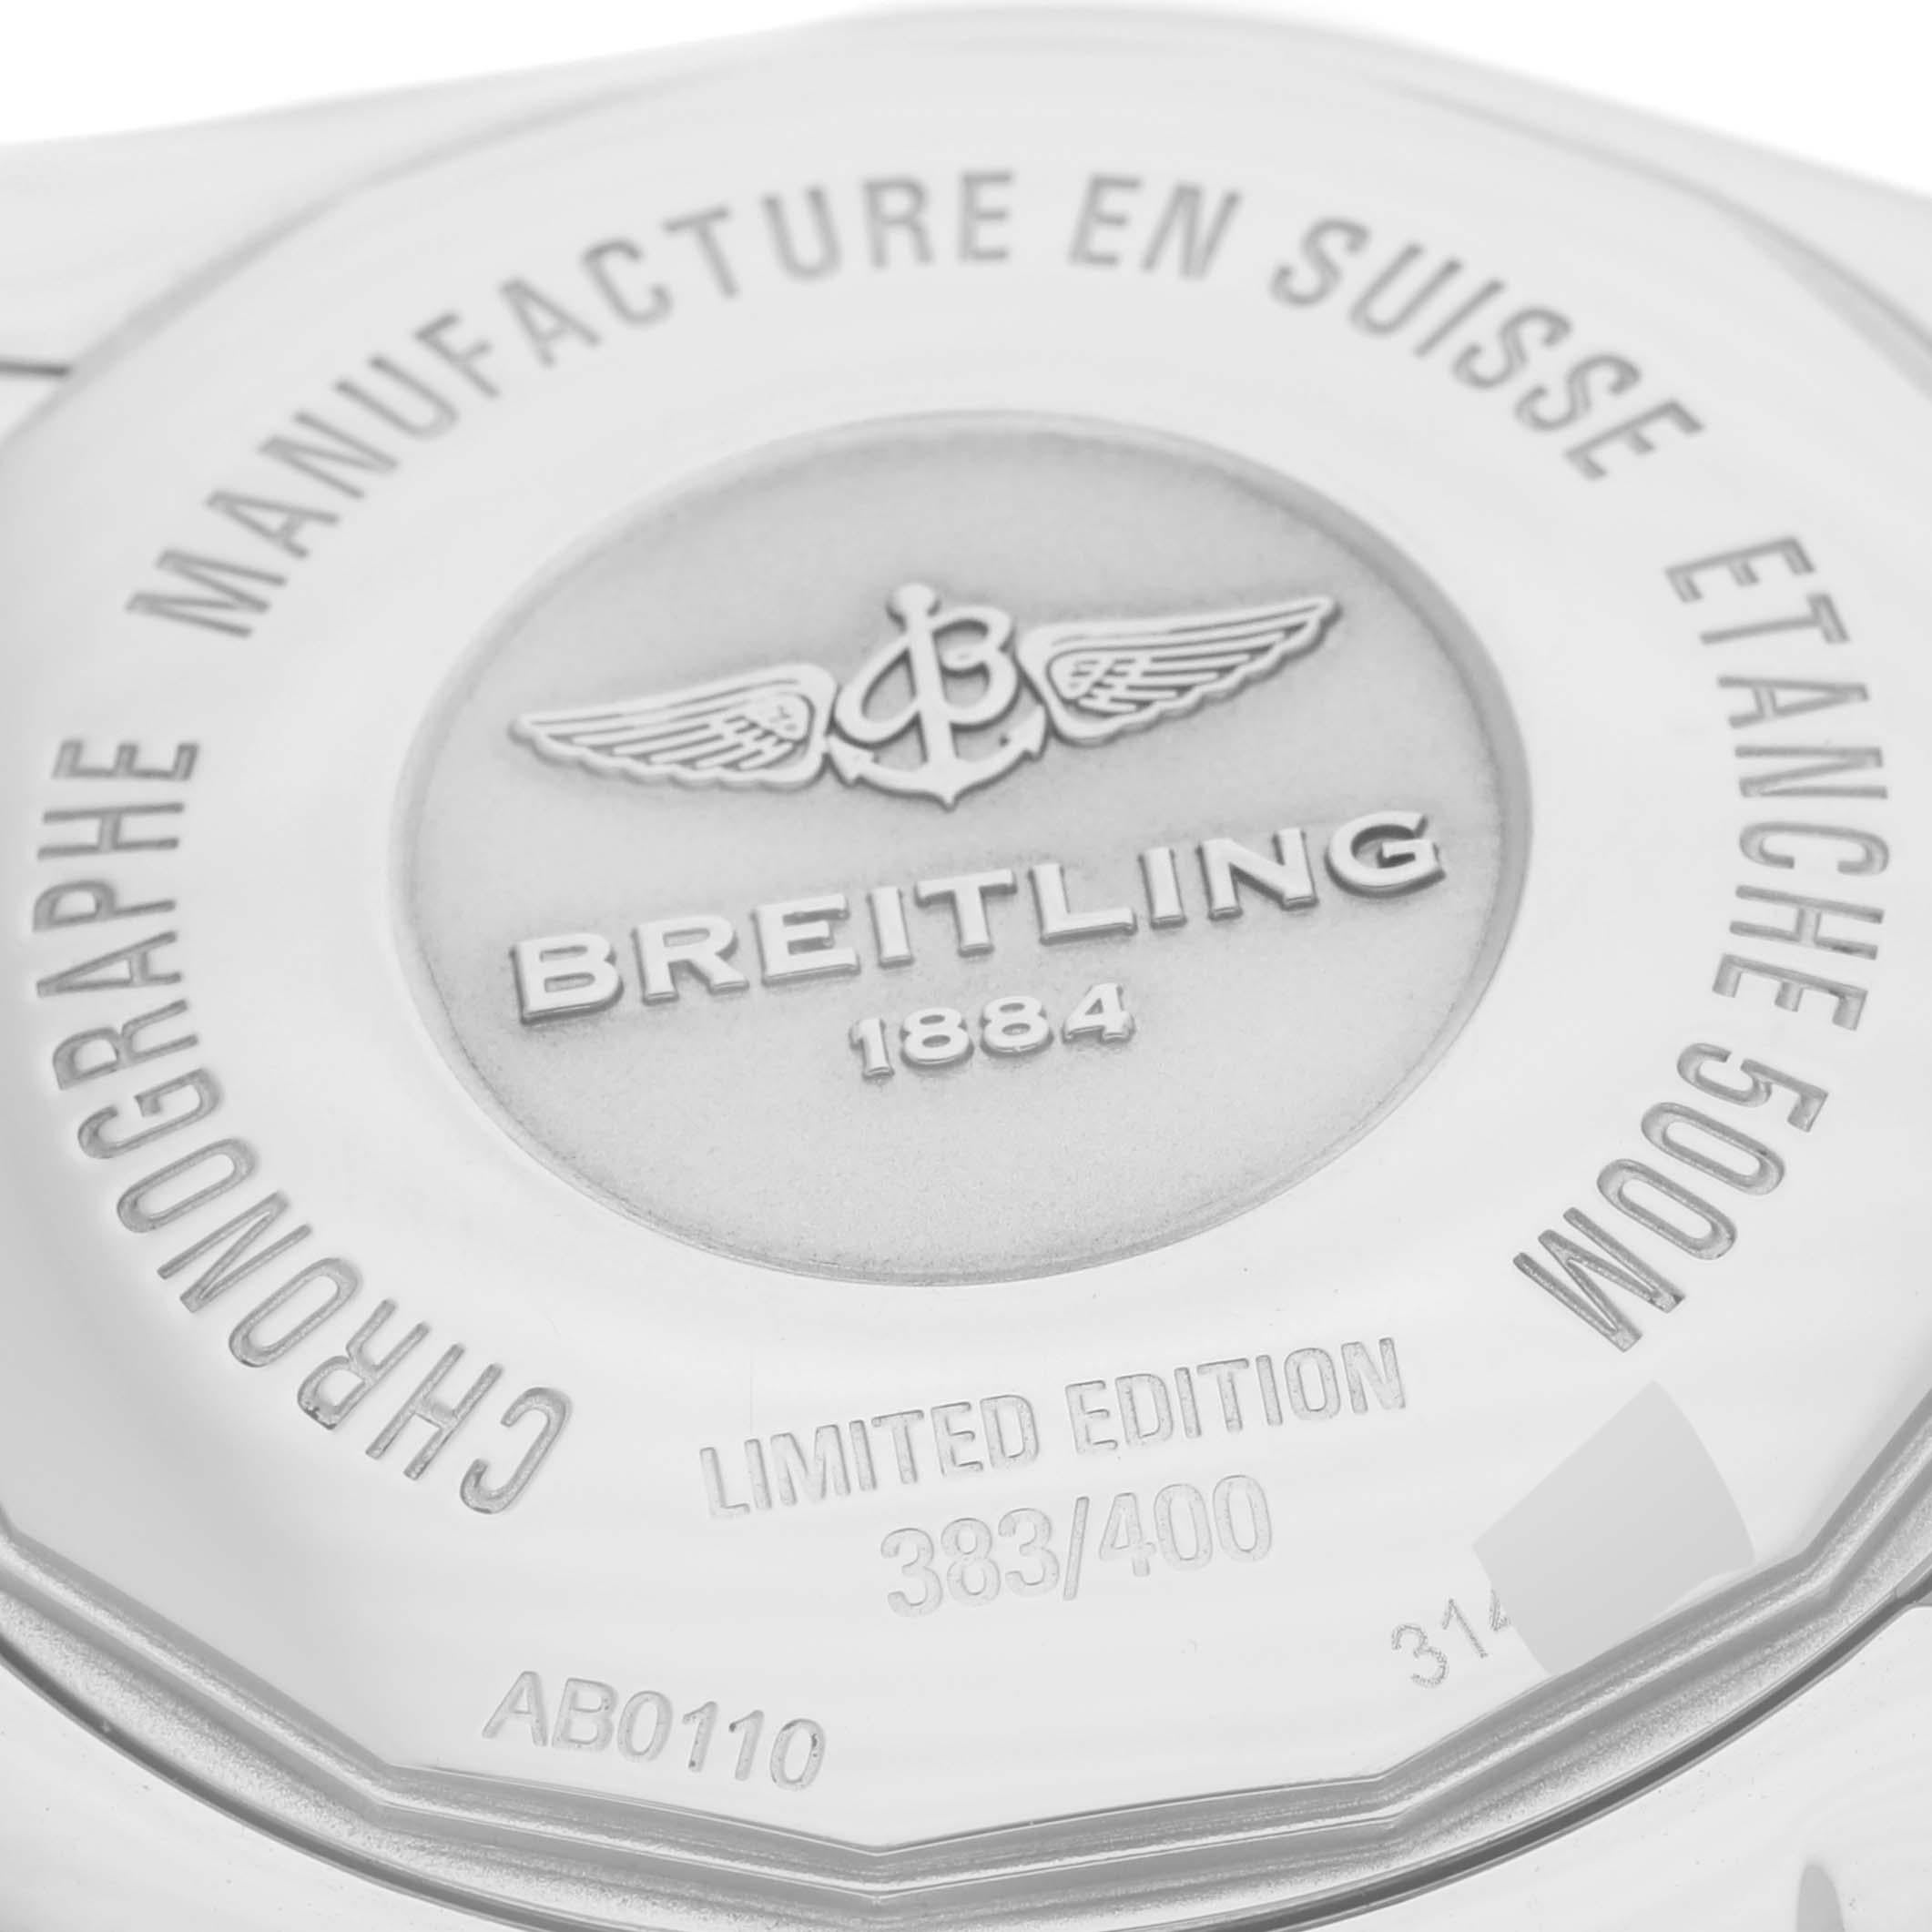 Breitling Chronomat 01 Blue Mother of Pearl Steel Mens Watch AB0110 Box Card. Automatic self-winding officially certified chronometer movement. Chronograph function. Stainless steel case 43.5 mm in diameter with screwed down crown and pushers.